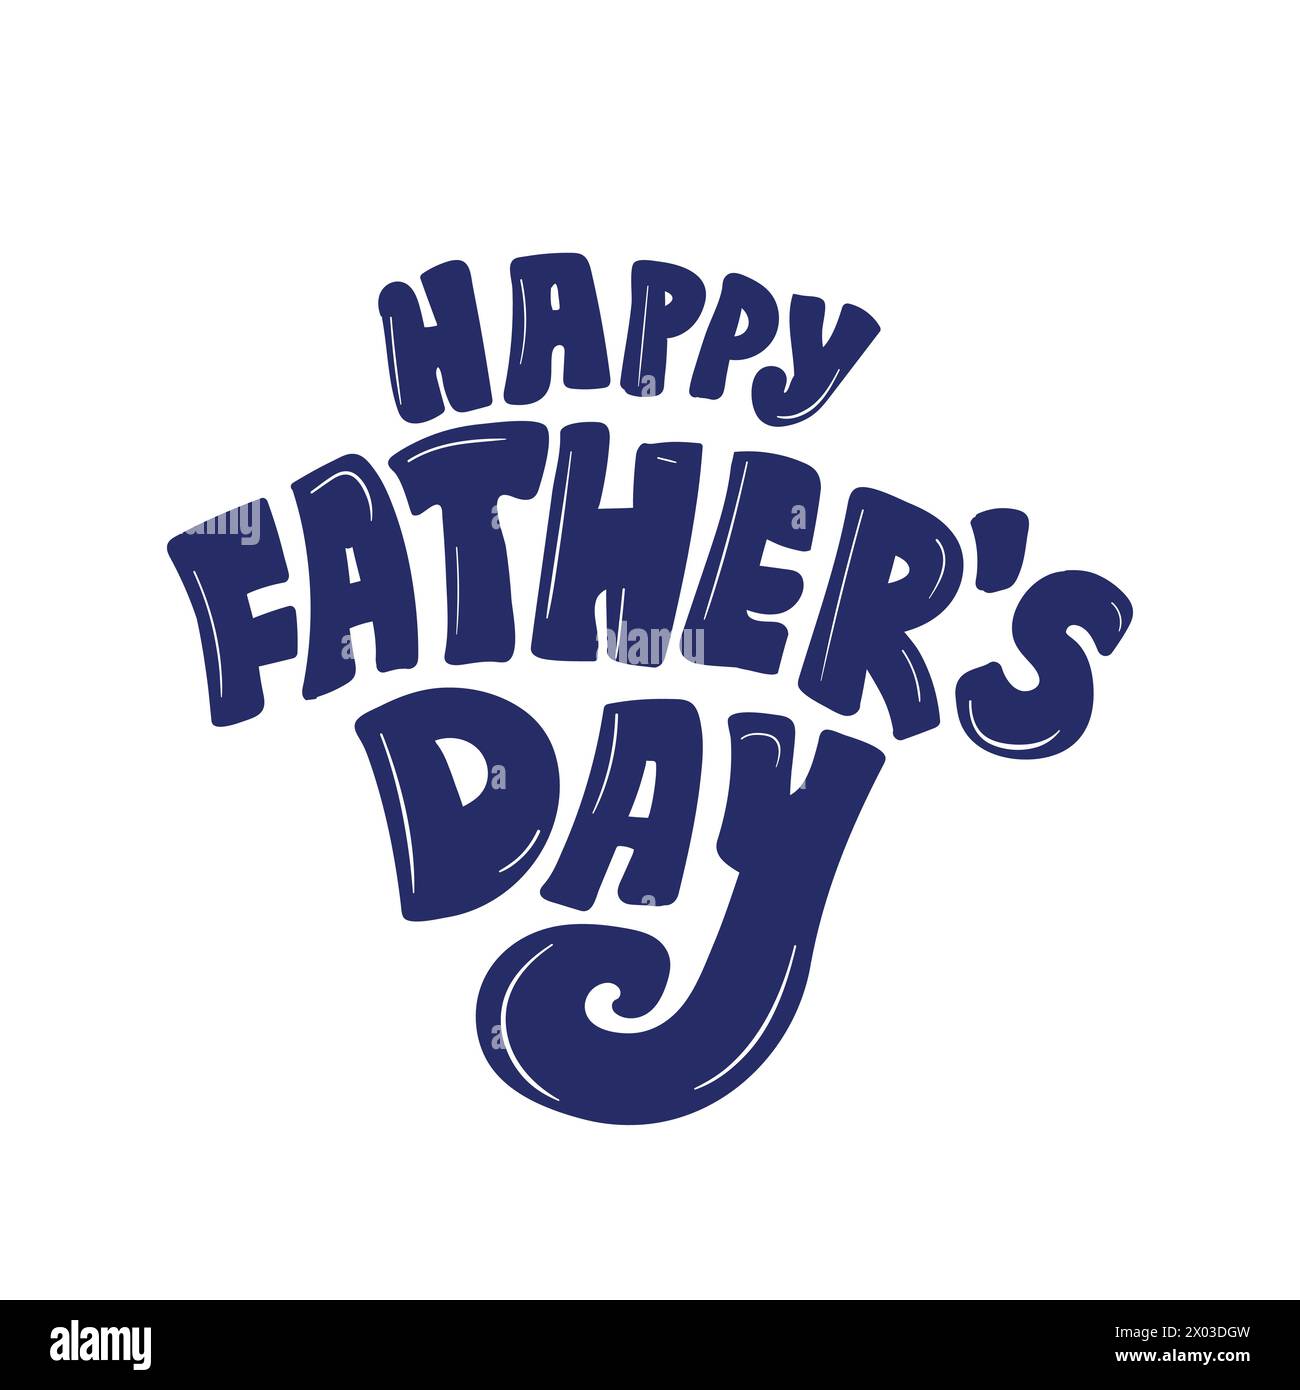 Happy fathers day text vector illustration. Hand drawn lettering for celebrating father's day holiday. Fathers day greeting card, social media Stock Vector